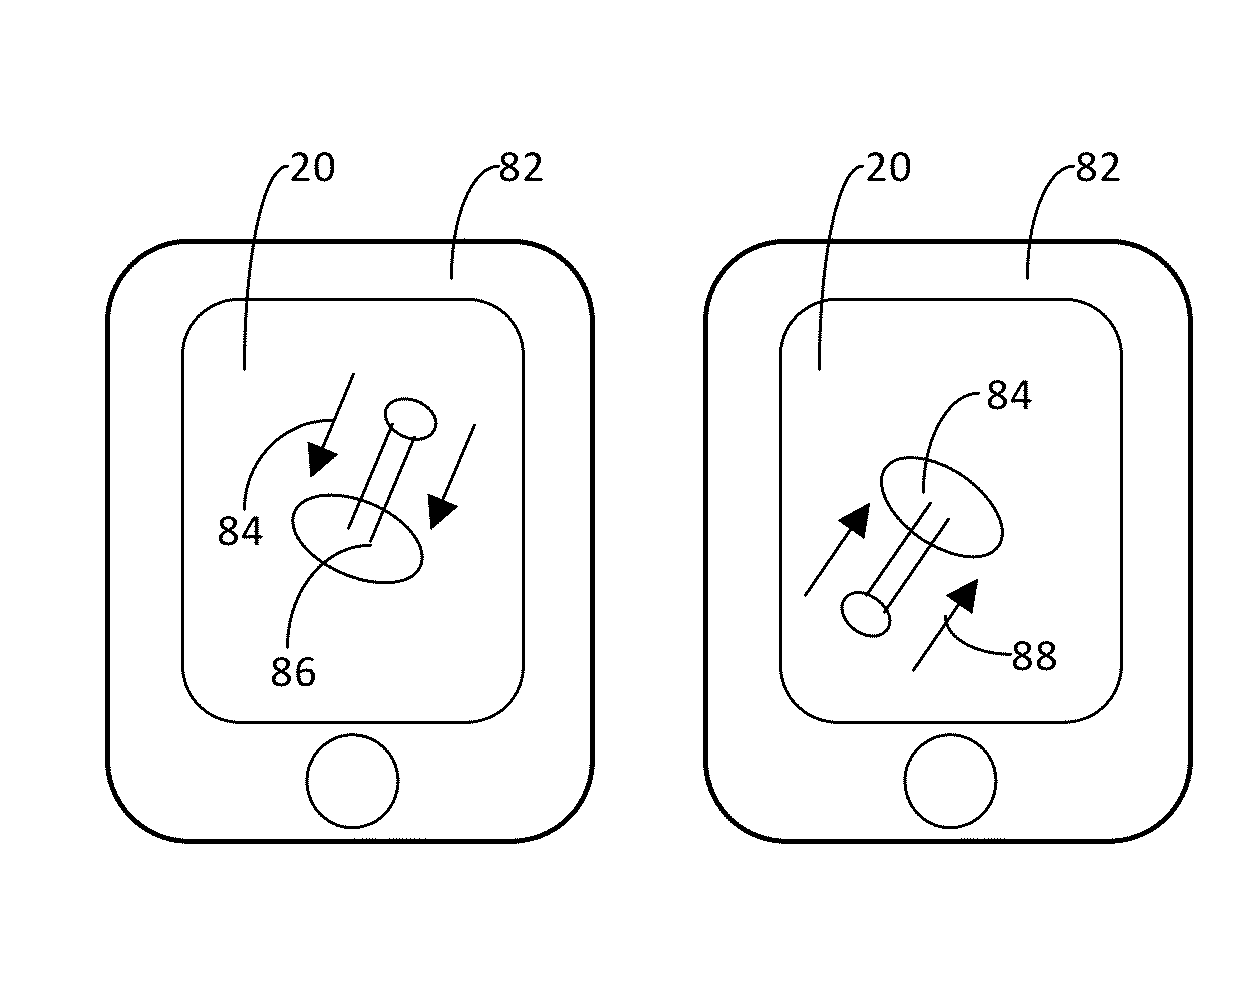 Apparatus and method for producing lateral force on a touchscreen